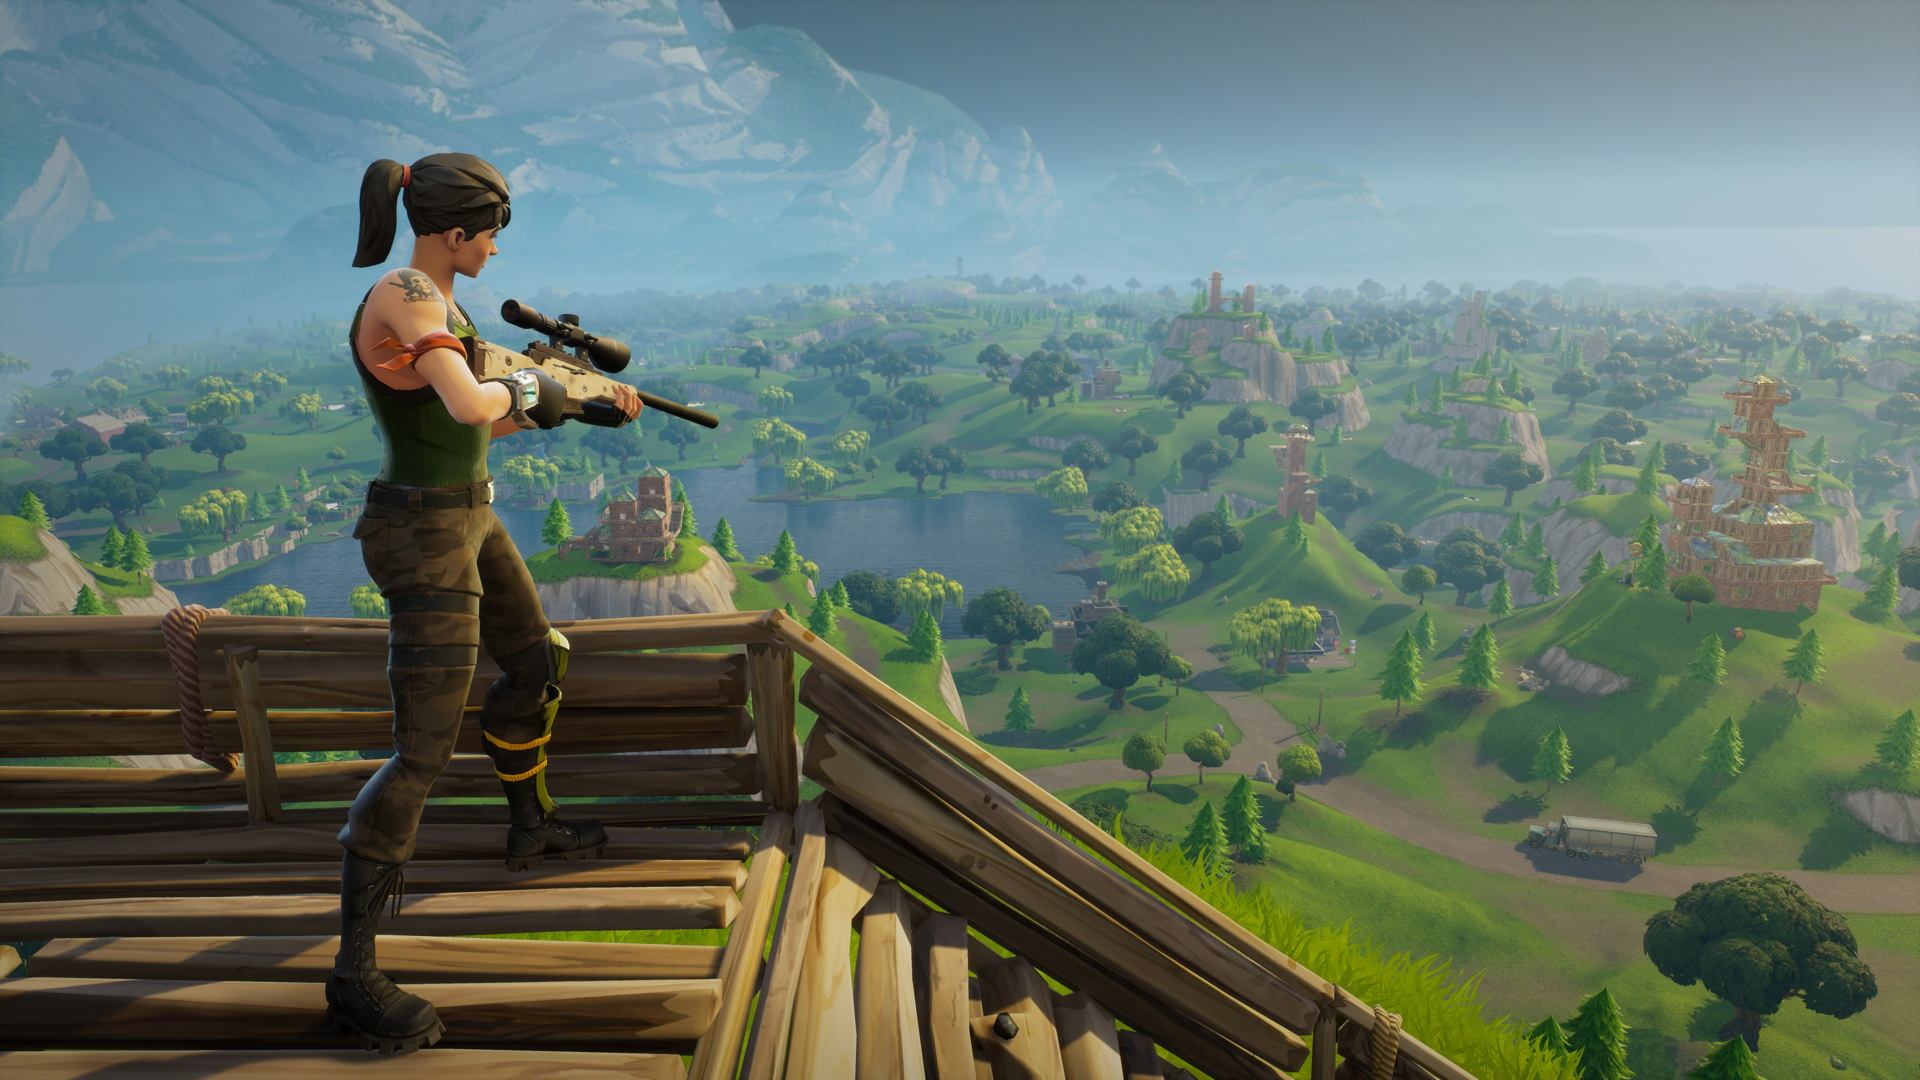 How to play Fortnite for absolute beginners